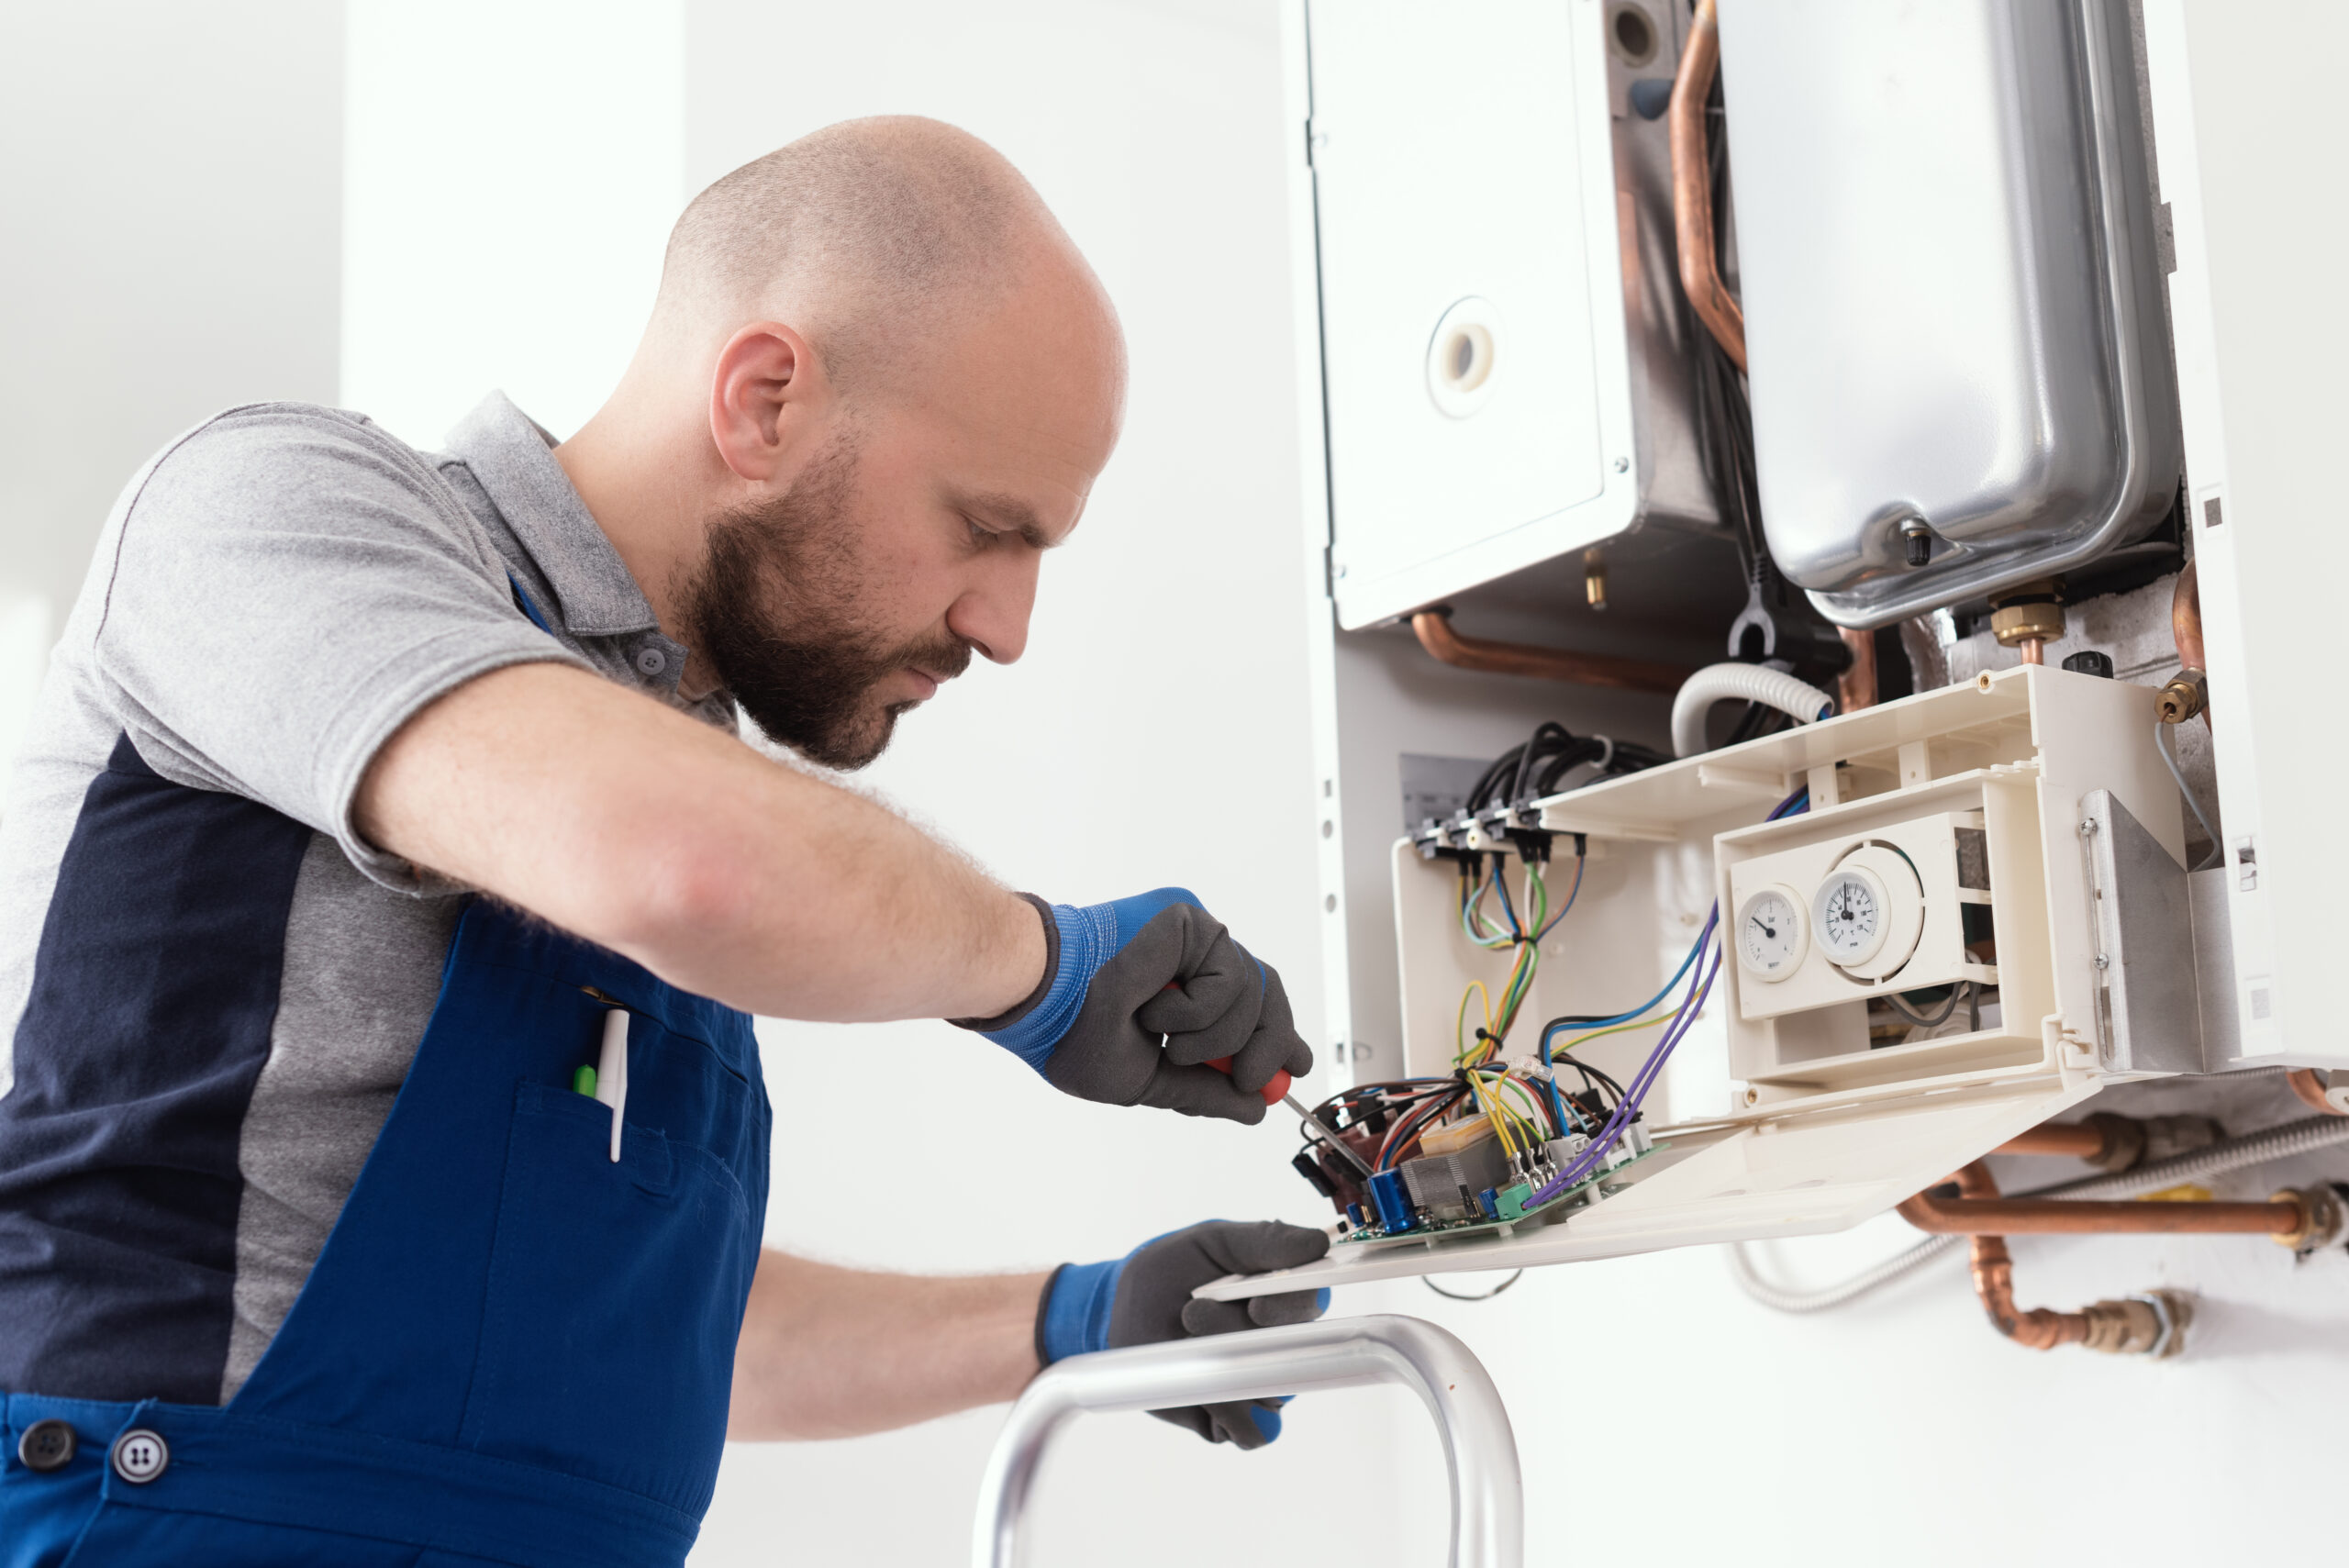 HVAC technician performing a service on a home boiler system